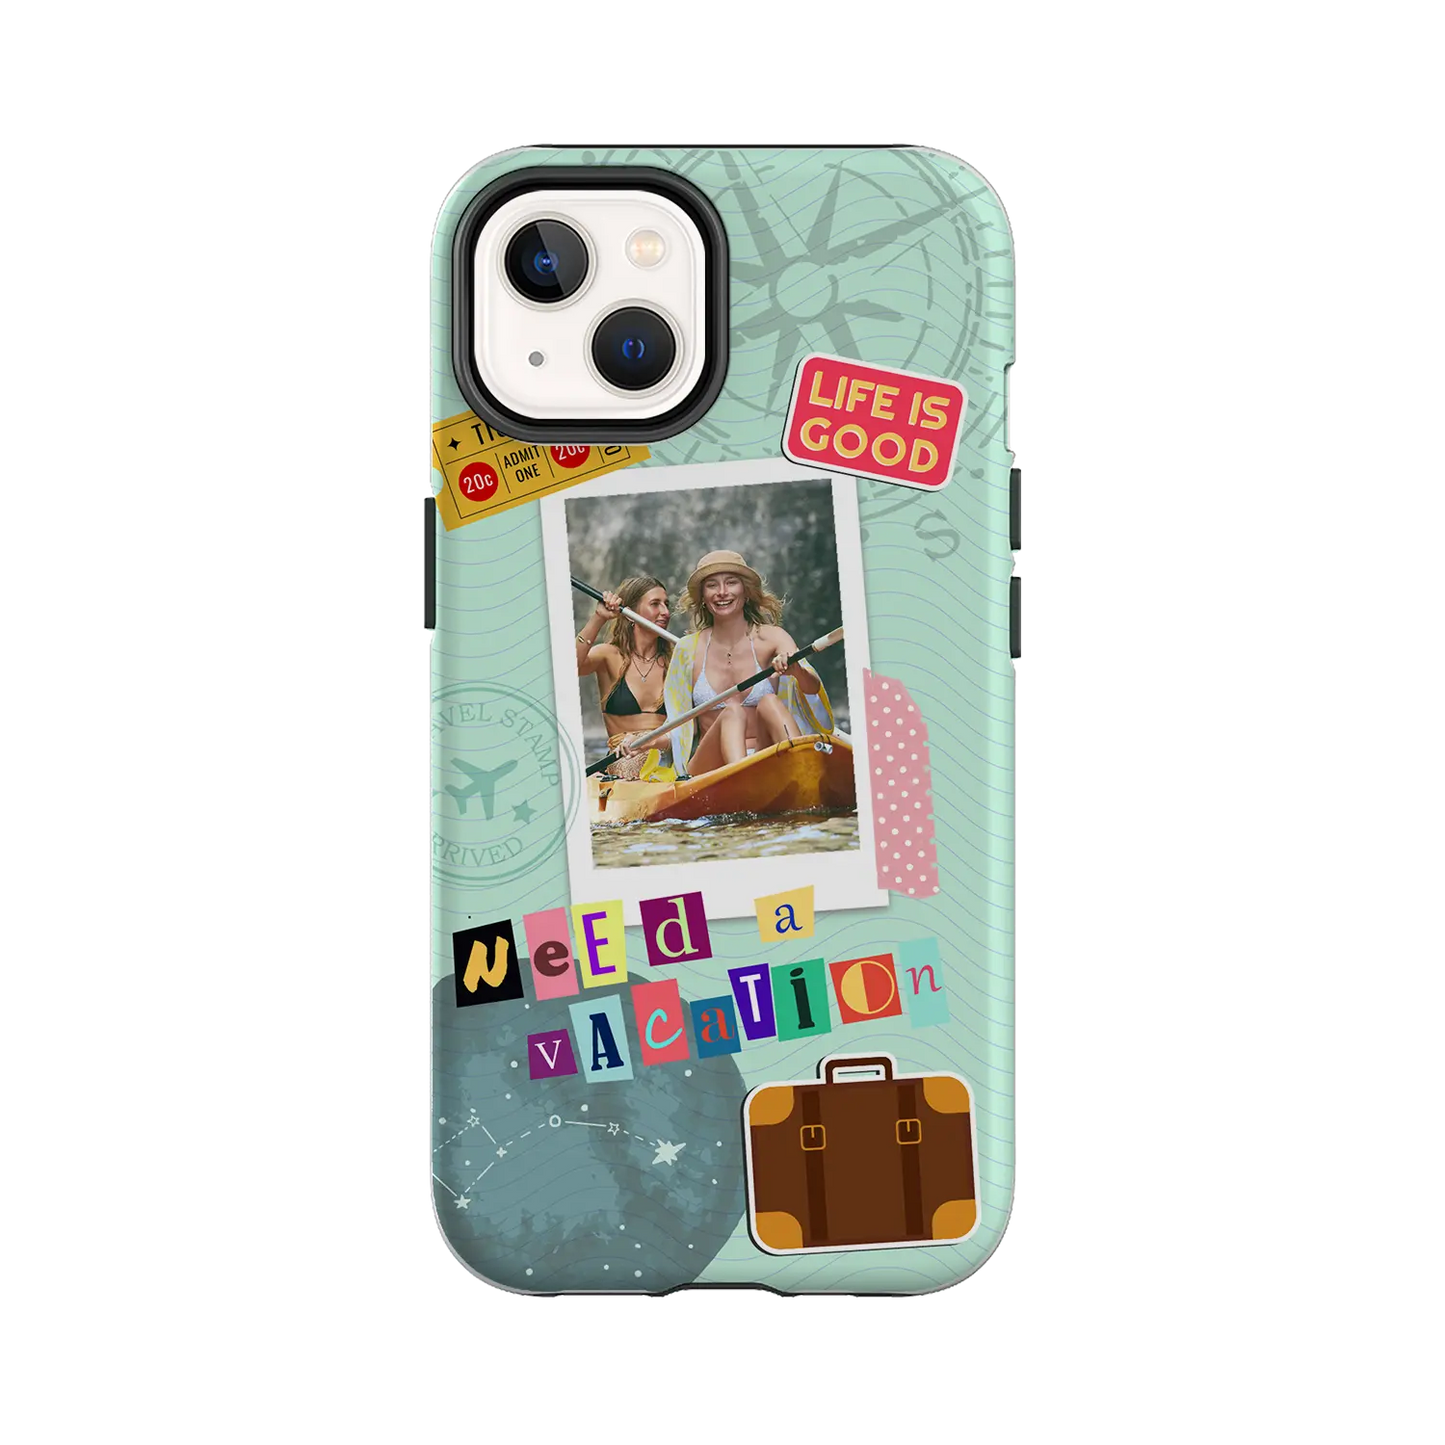 Need A Vacation - Custom iPhone Case